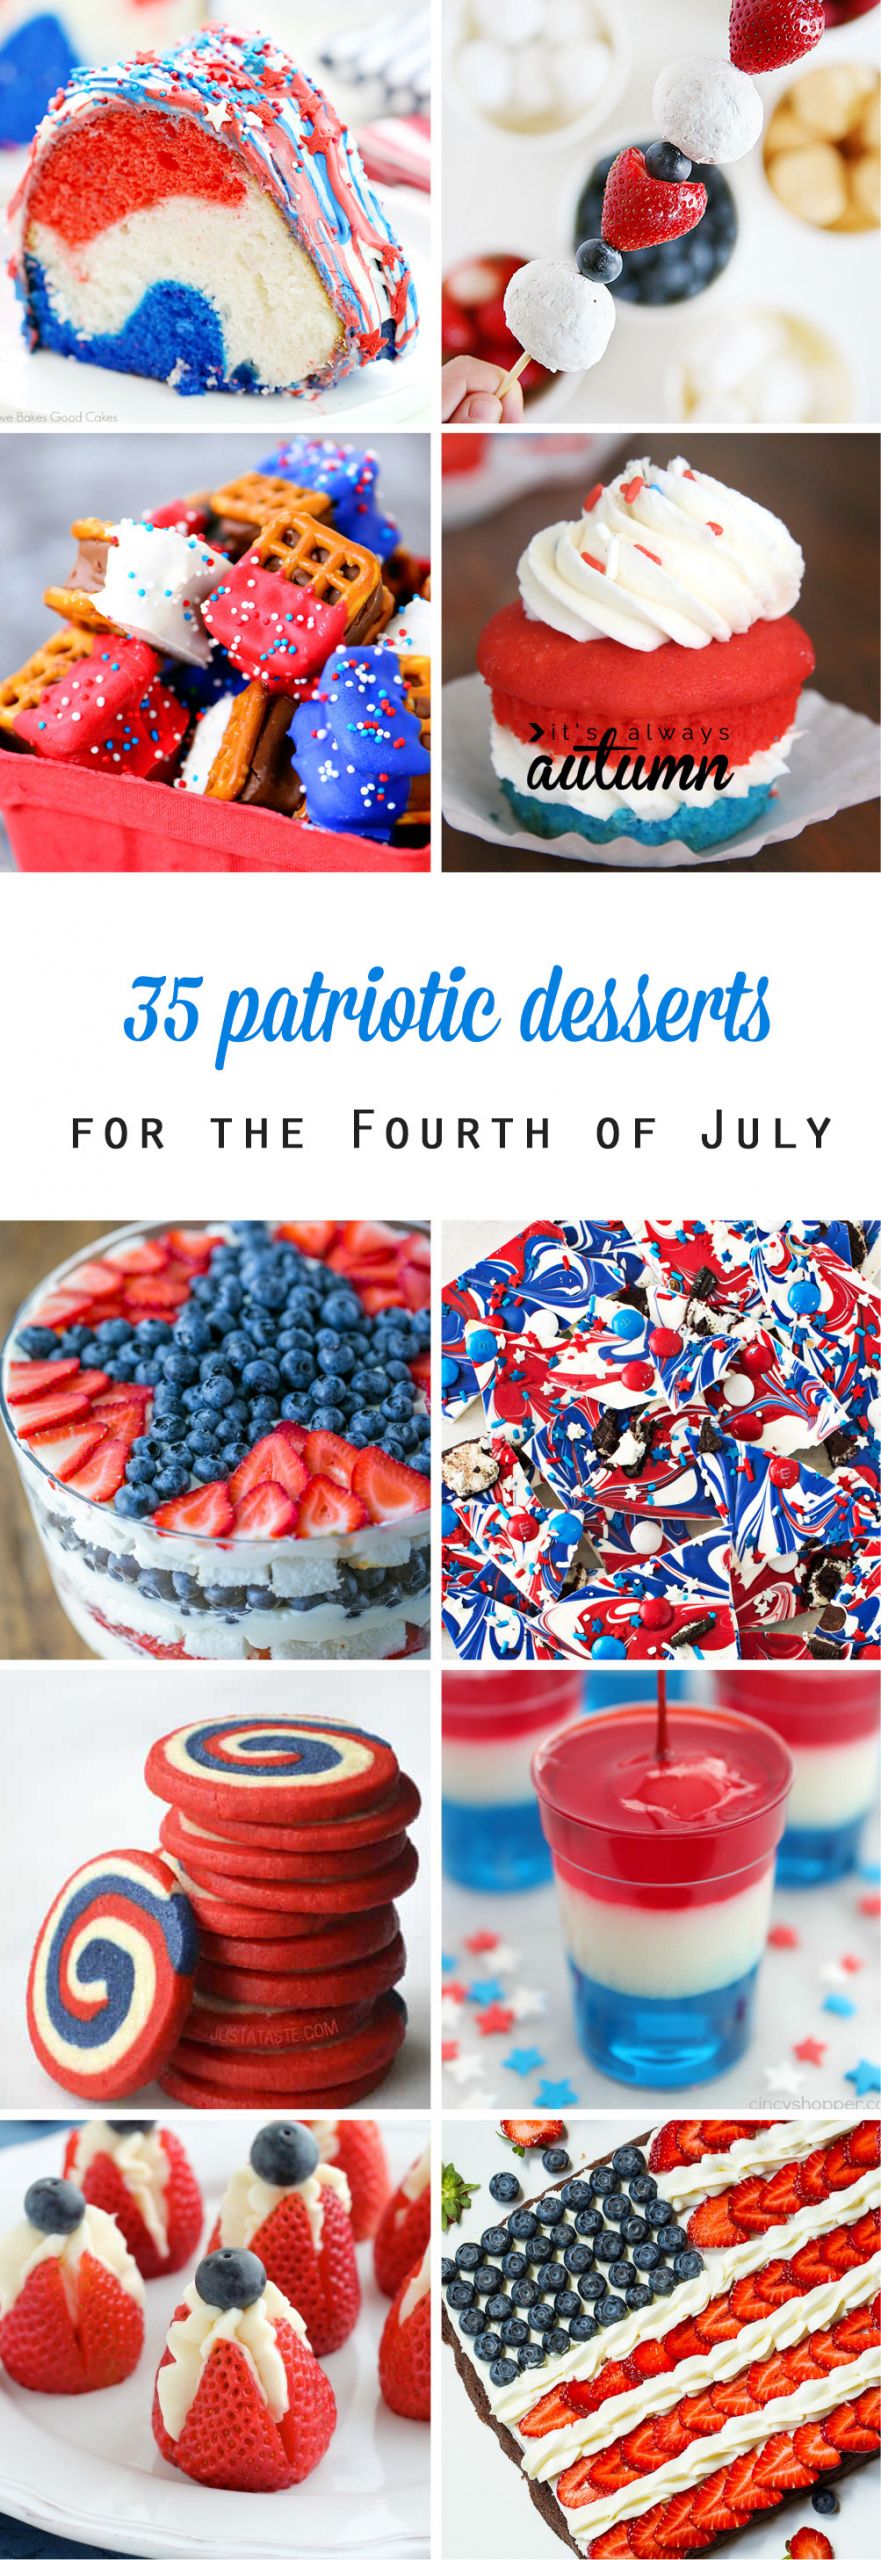 Simple 4Th Of July Desserts
 20 red white and blue desserts for the Fourth of July